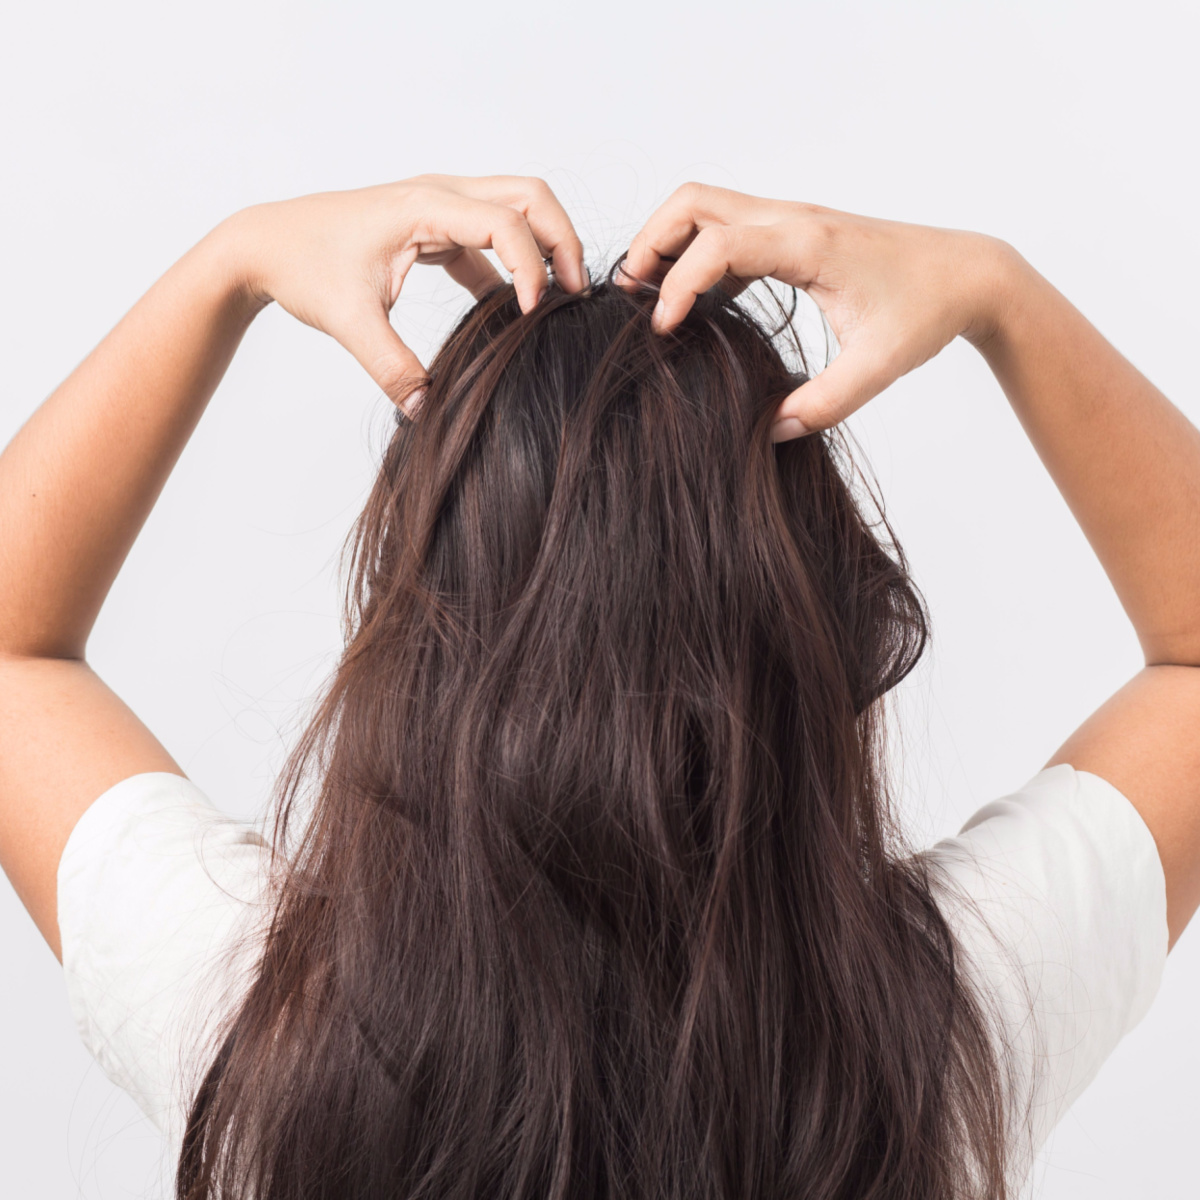 woman scratching itchy scalp massaging roots of long brown wavy hair behind back of head